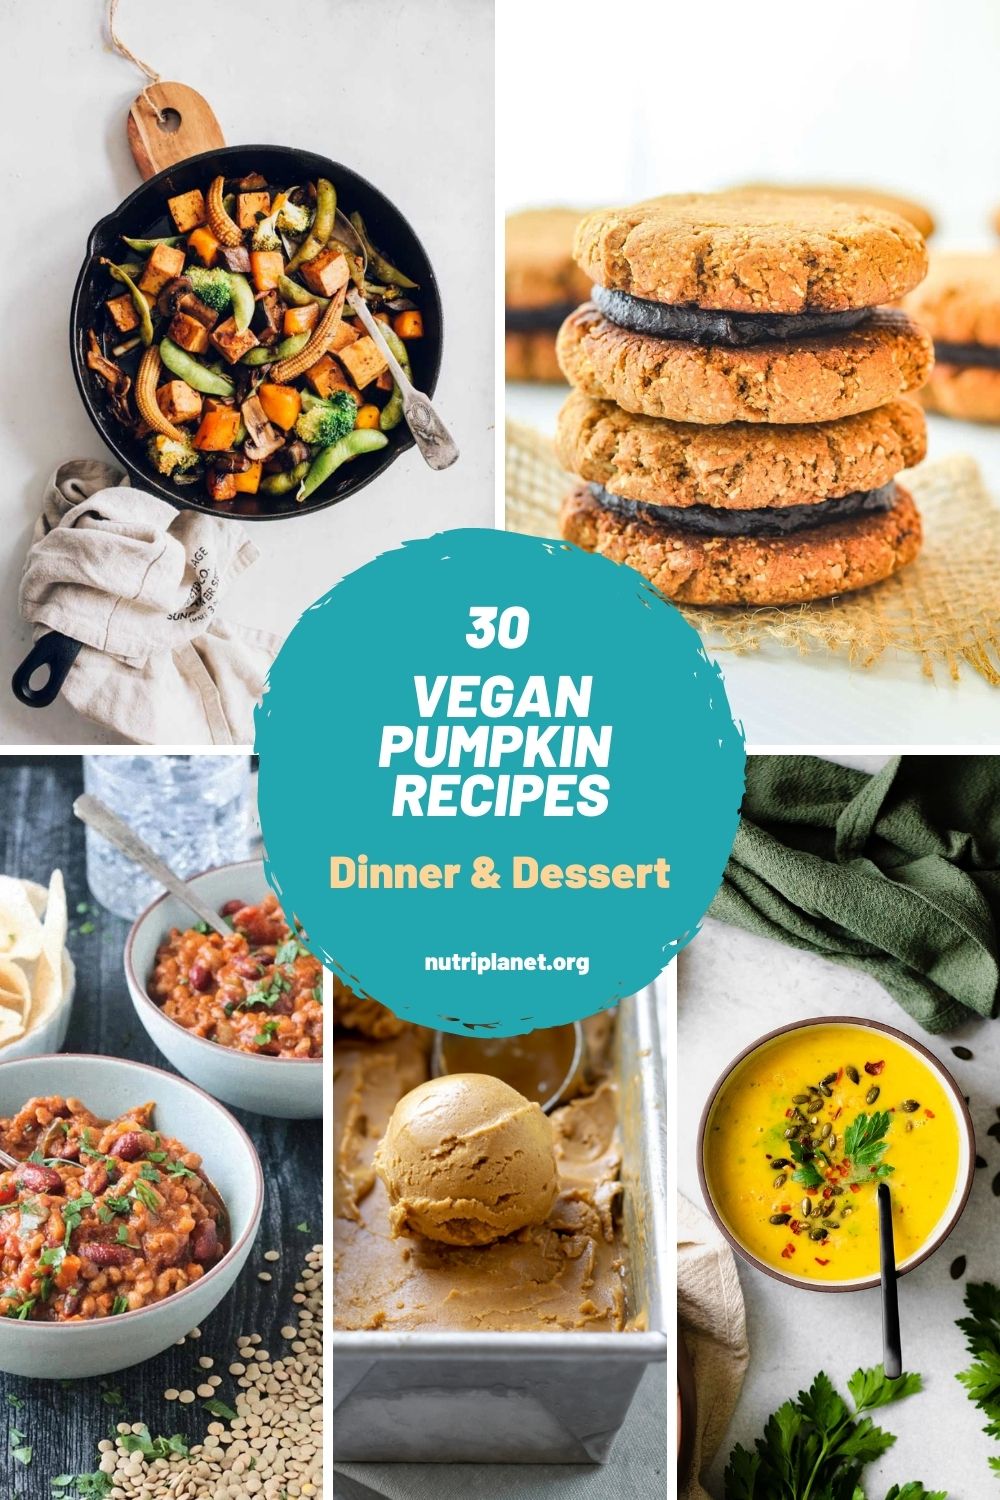 Learn how to make healthy vegan pumpkin recipes, both for dinner and dessert. From pumpkin curry and soups to pumpkin pie, blondies, brownies and ice cream.